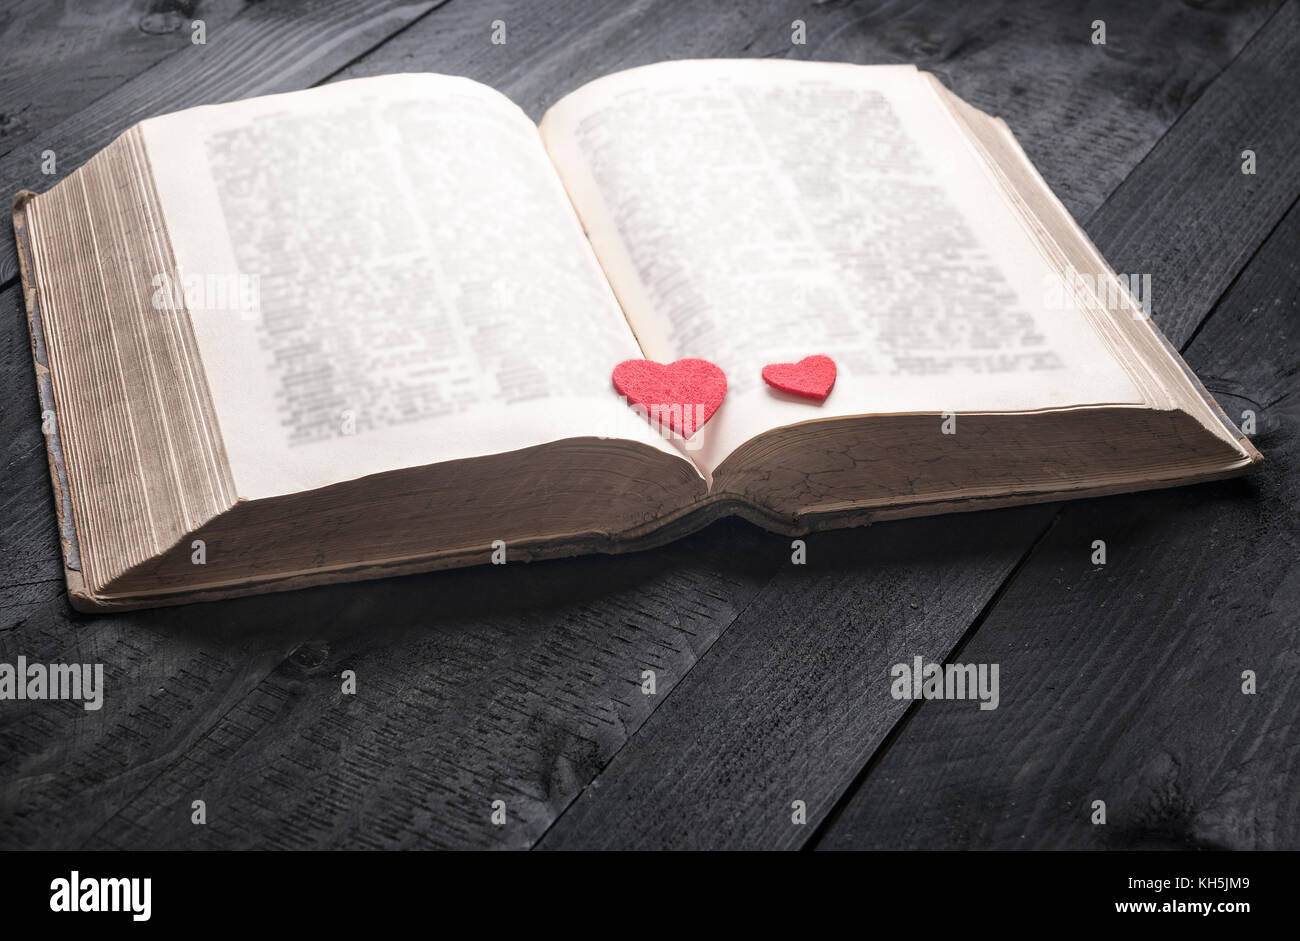 Schooling theme image with an antique open book and two red hearts on its pages, displayed on a vintage wooden table. A concept for reading,  studying Stock Photo